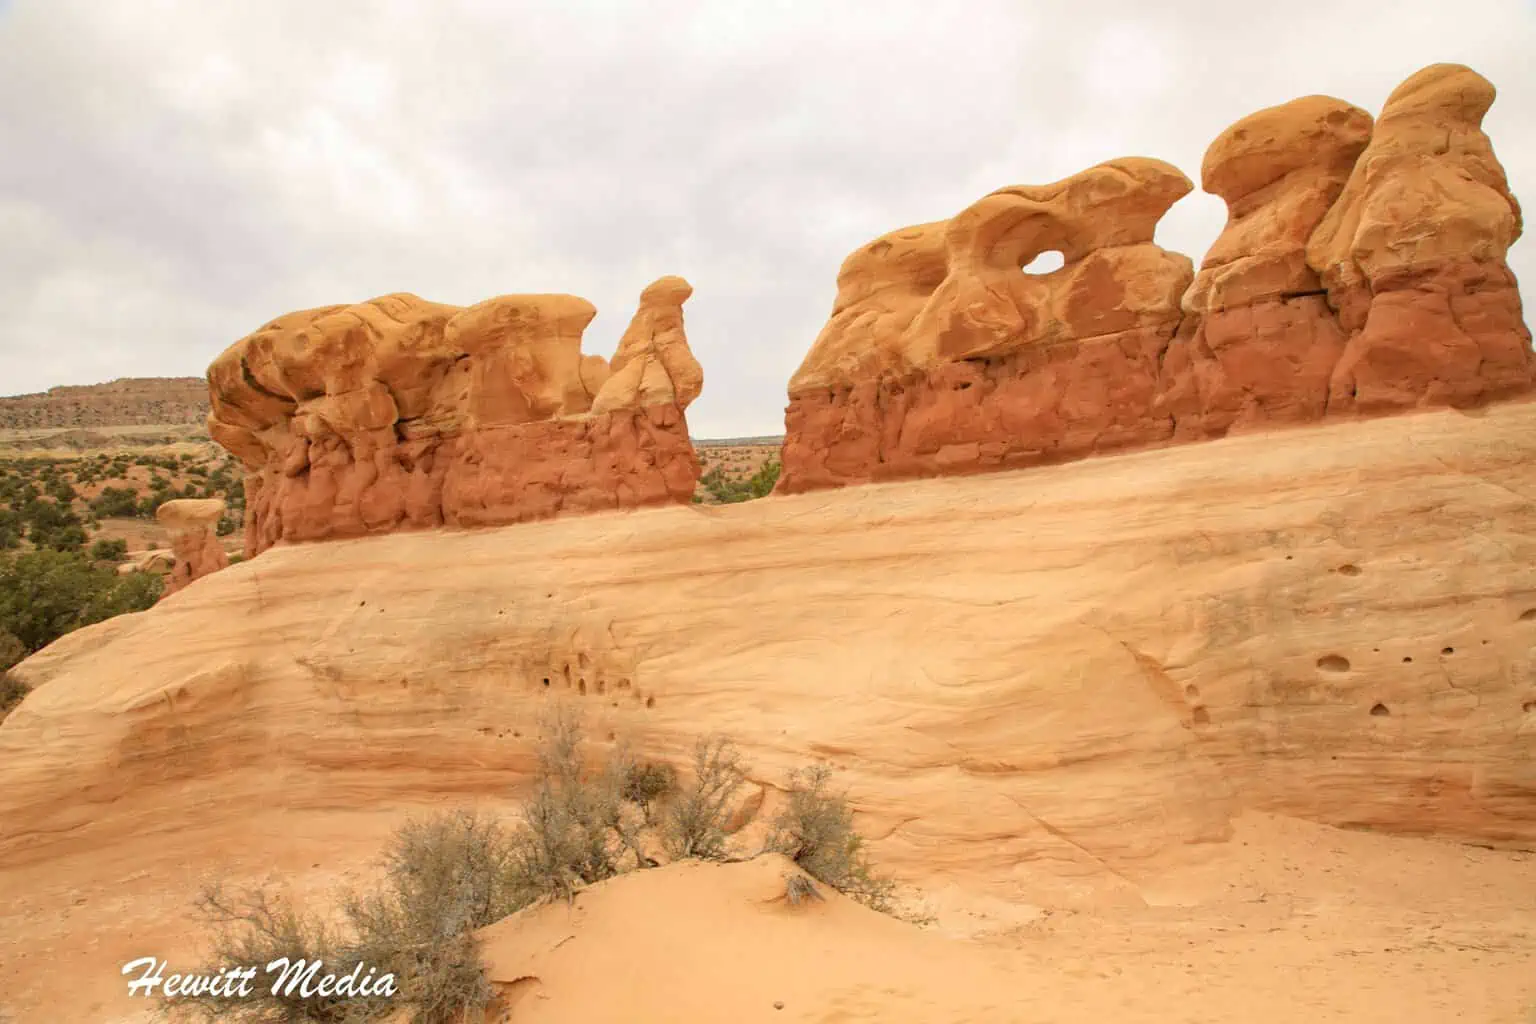 Visiting Devil's Garden in the Grand Staircase-Escalante National Monument